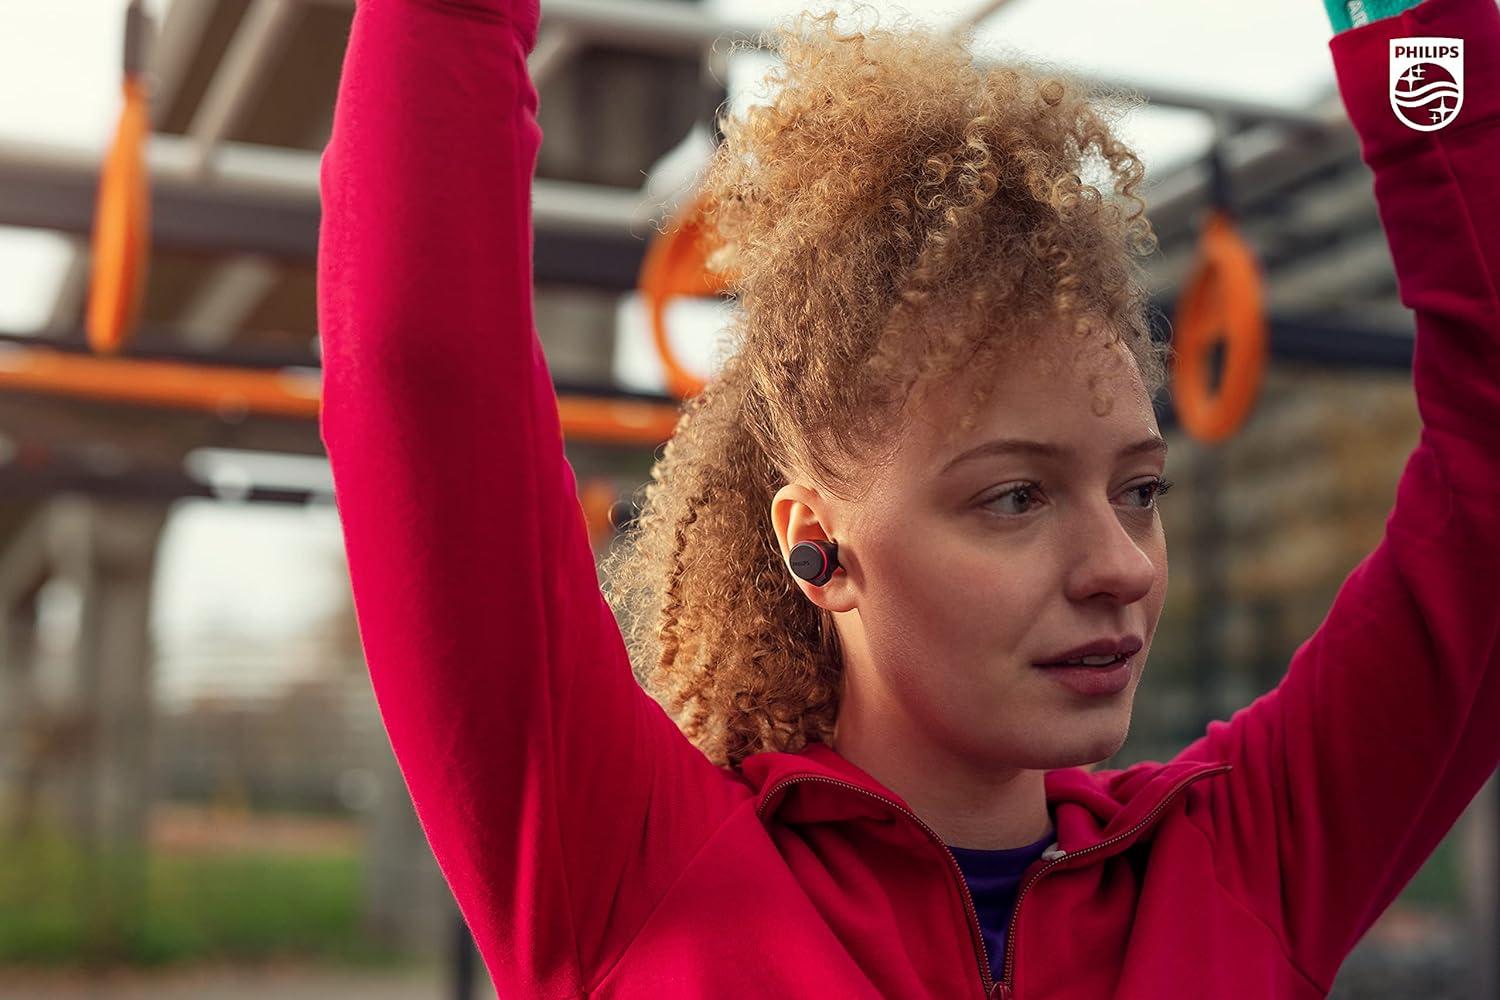 PHILIPS GO A7507 Wireless Sports Headphones with Noise Canceling